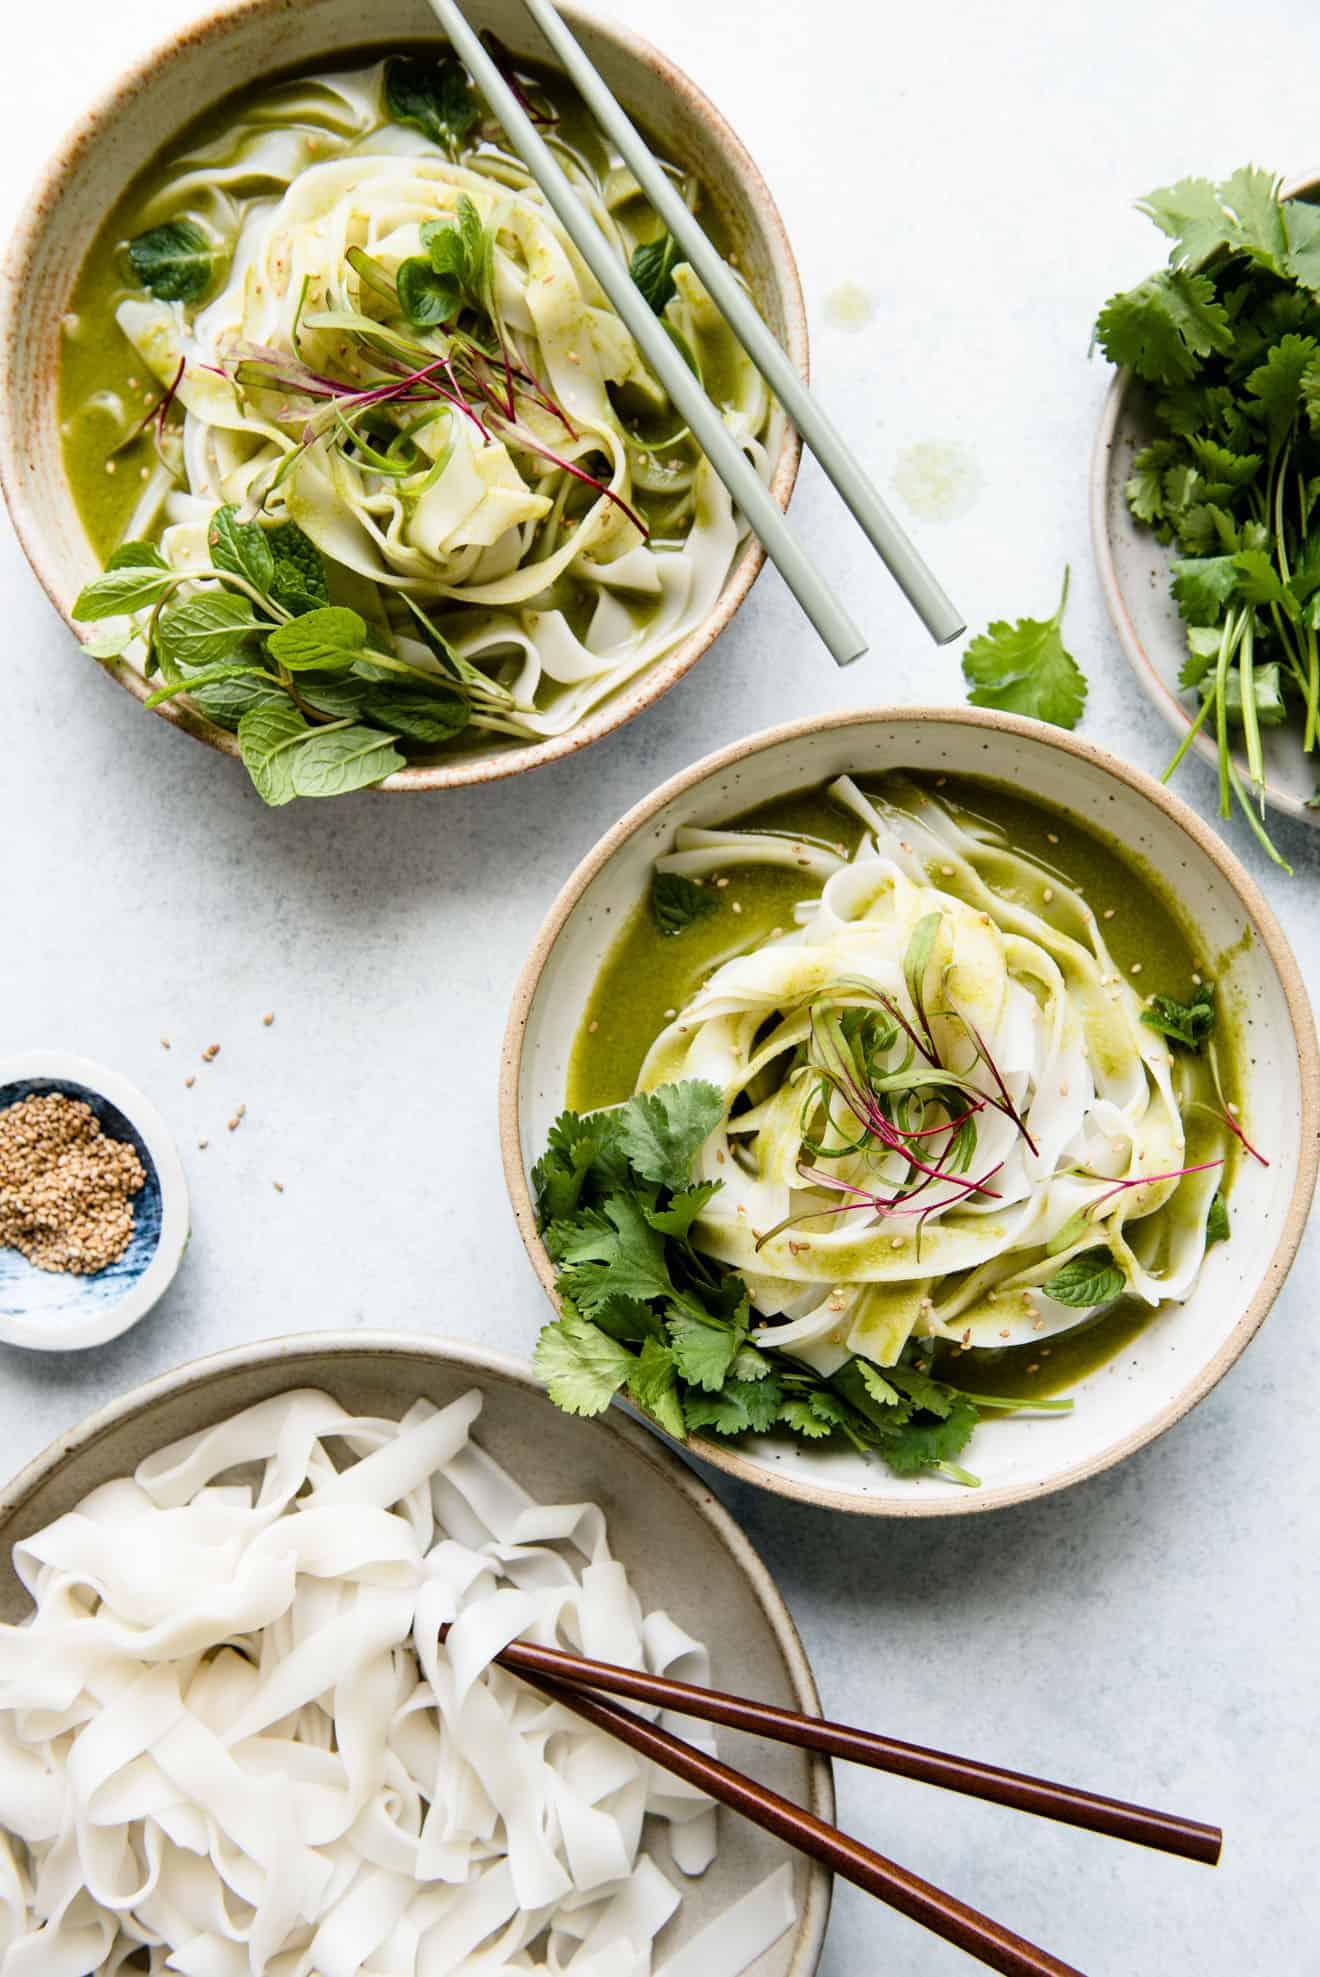 Easy Green Curry Noodles - ready in under 20 minutes and made with less than 10 ingredients!